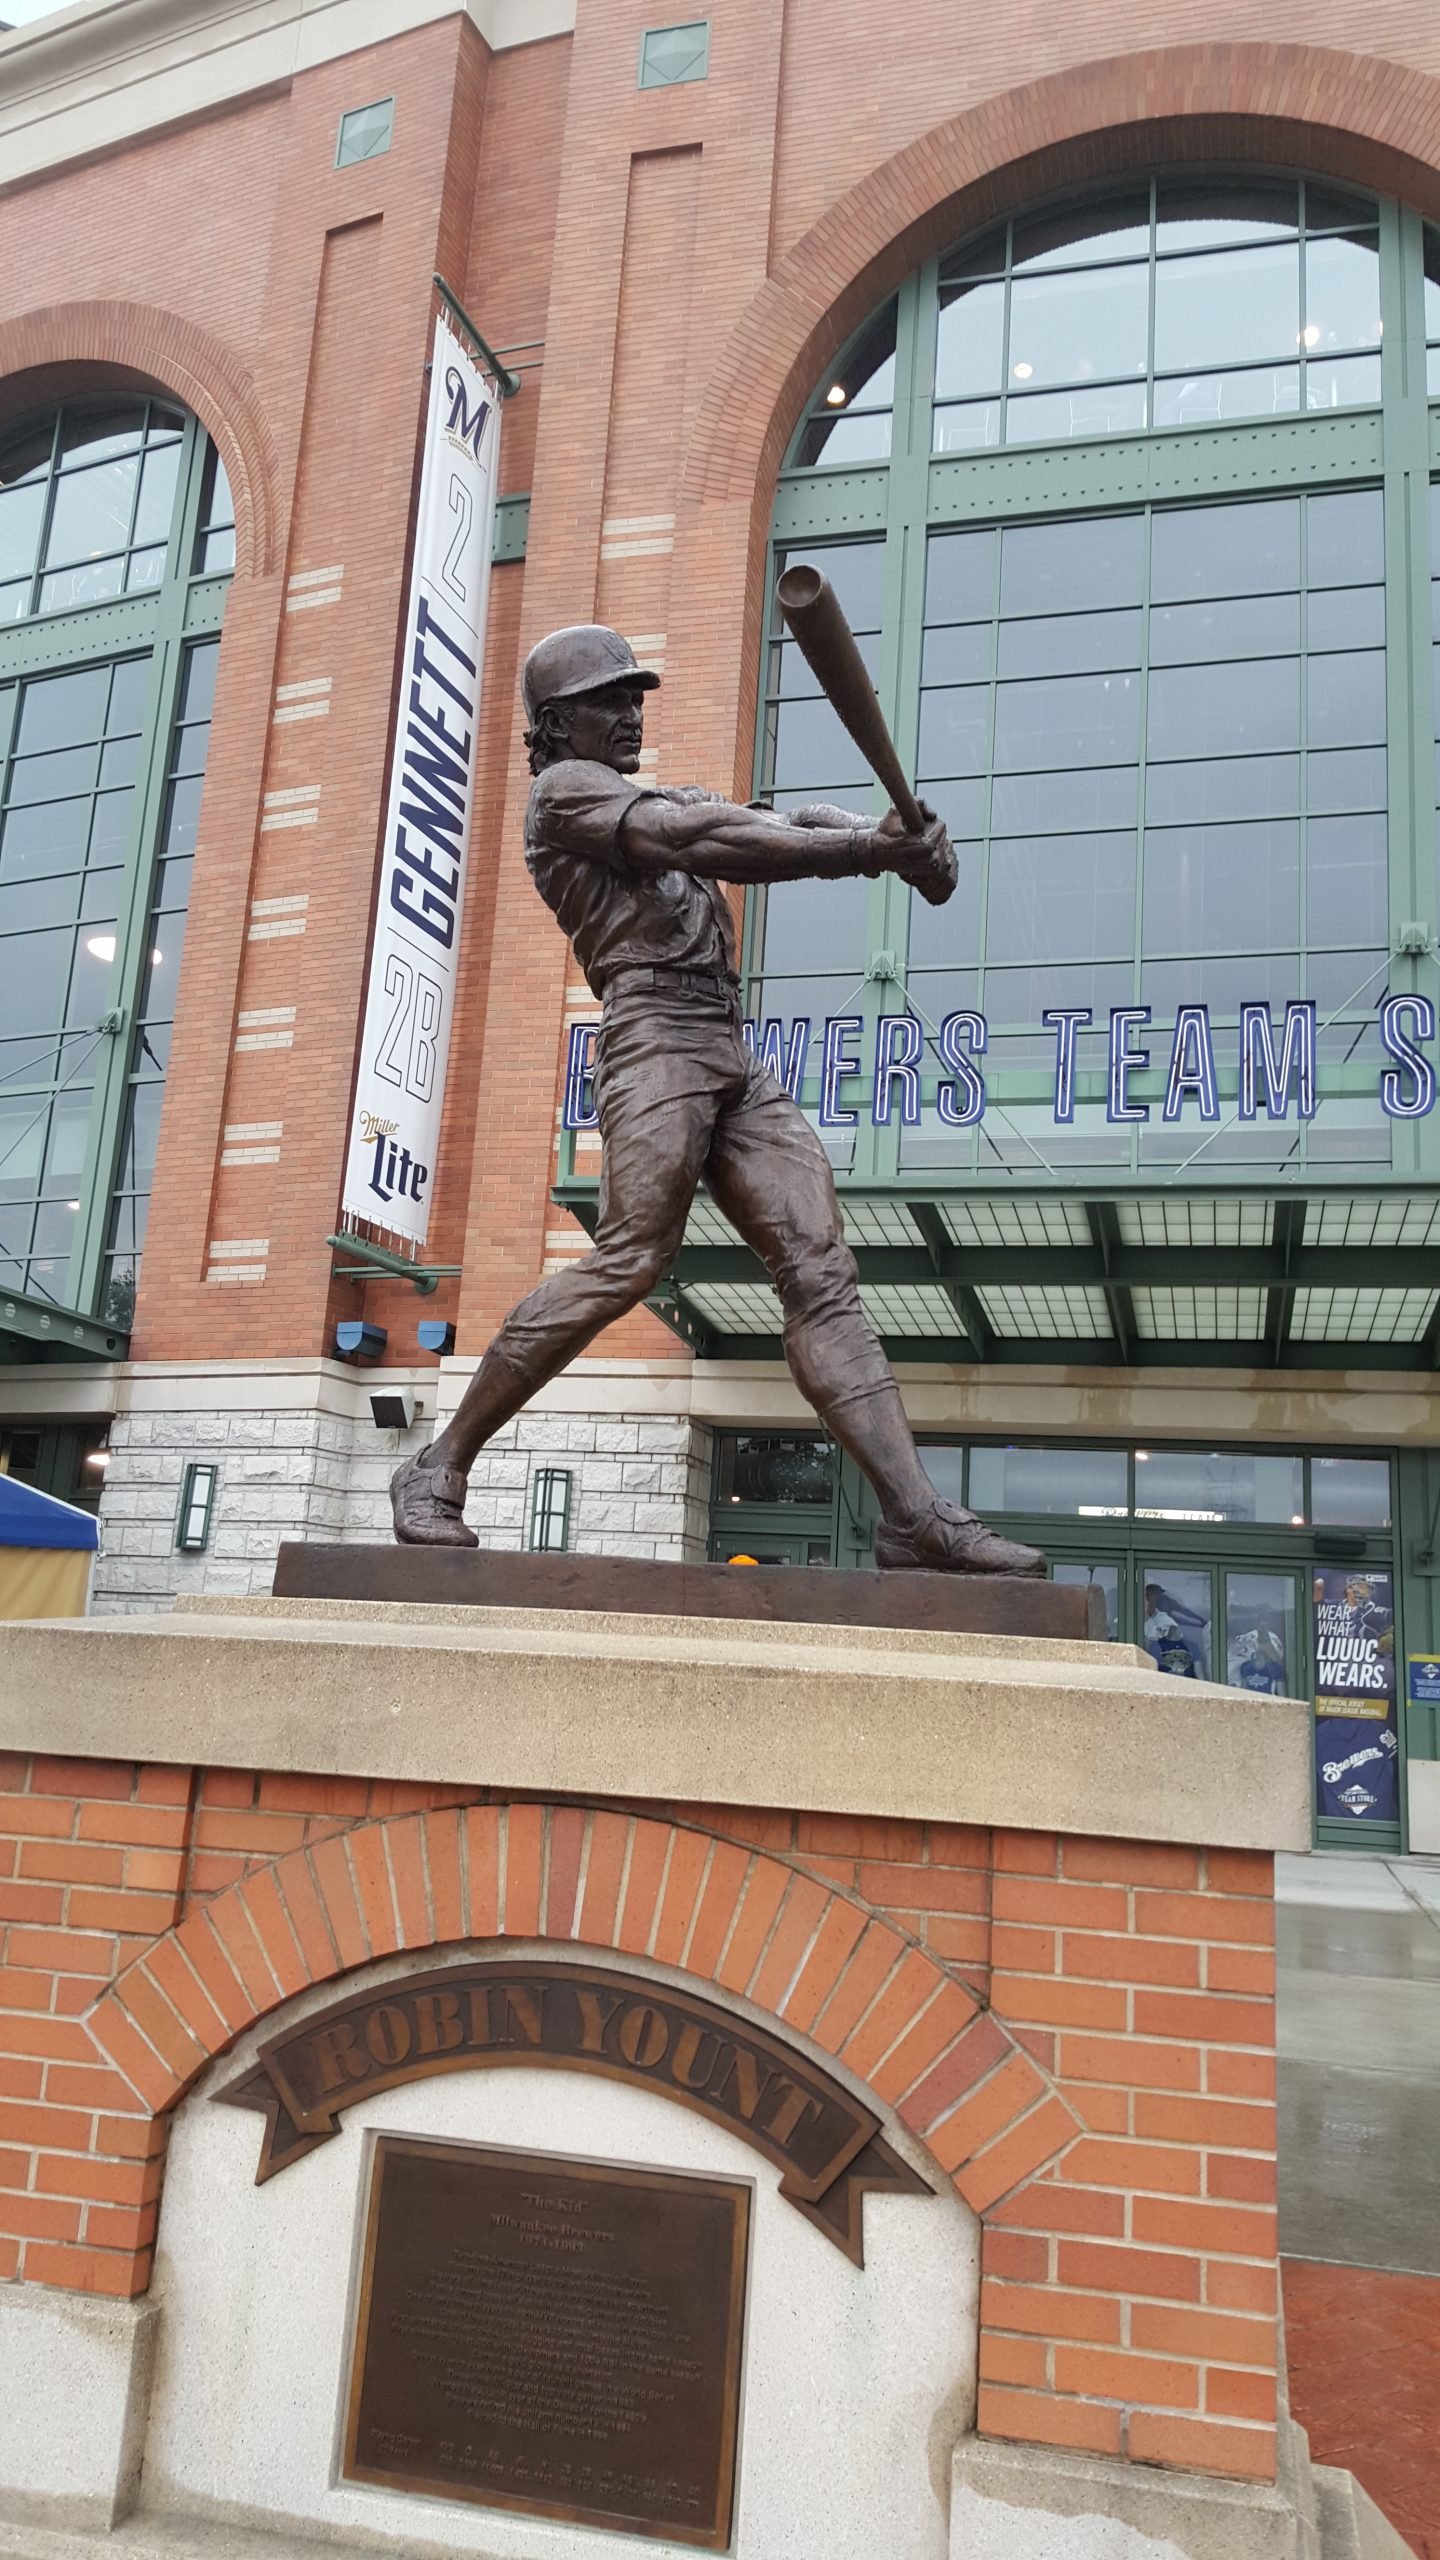 The Kid, The statue of Robin Yount outside Miller Park.